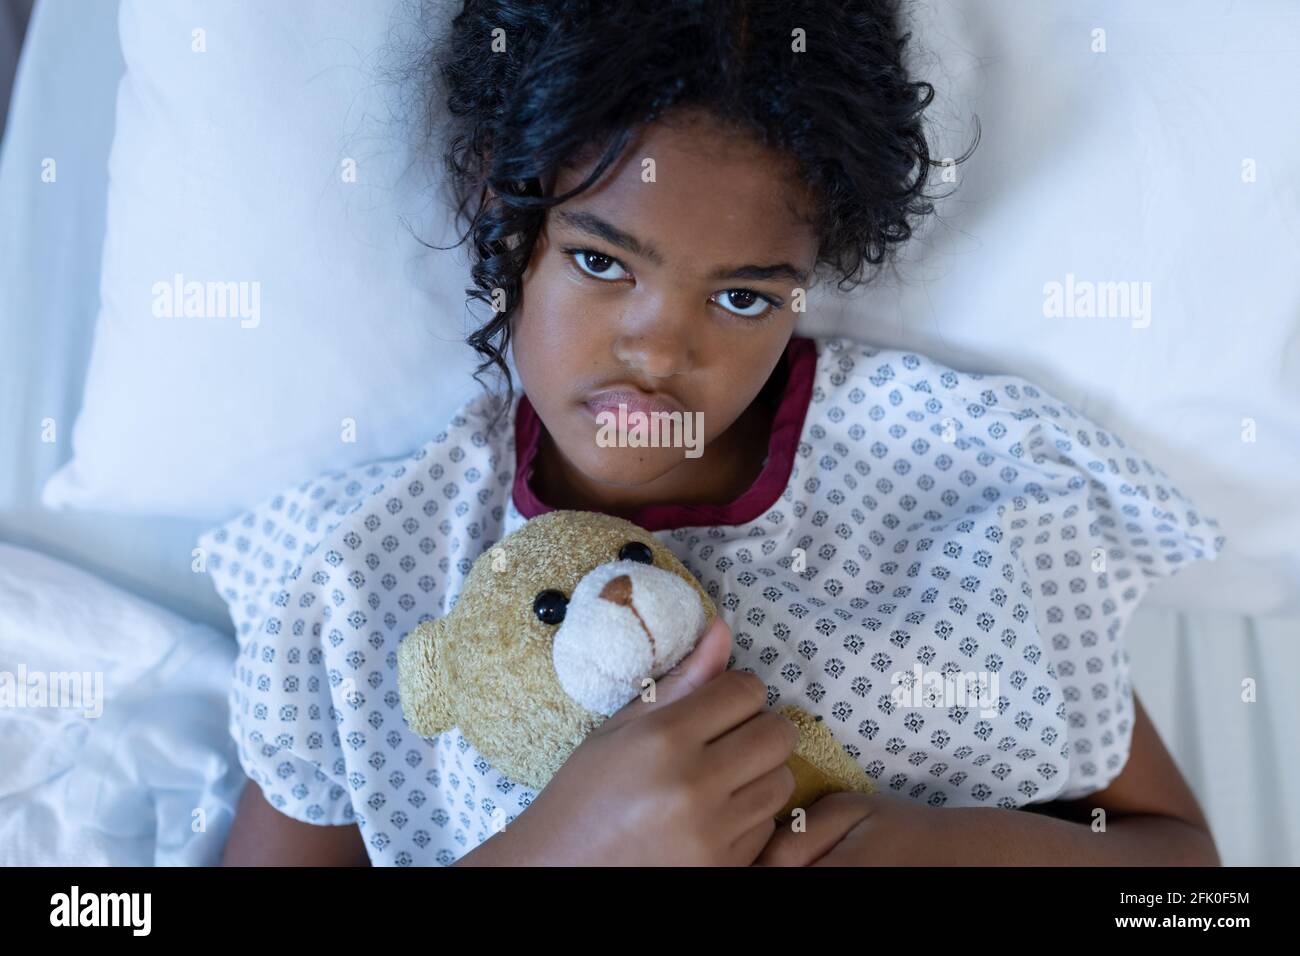 Portrait of sick mixed race girl lying in hospital bed holding teddy bear Stock Photo